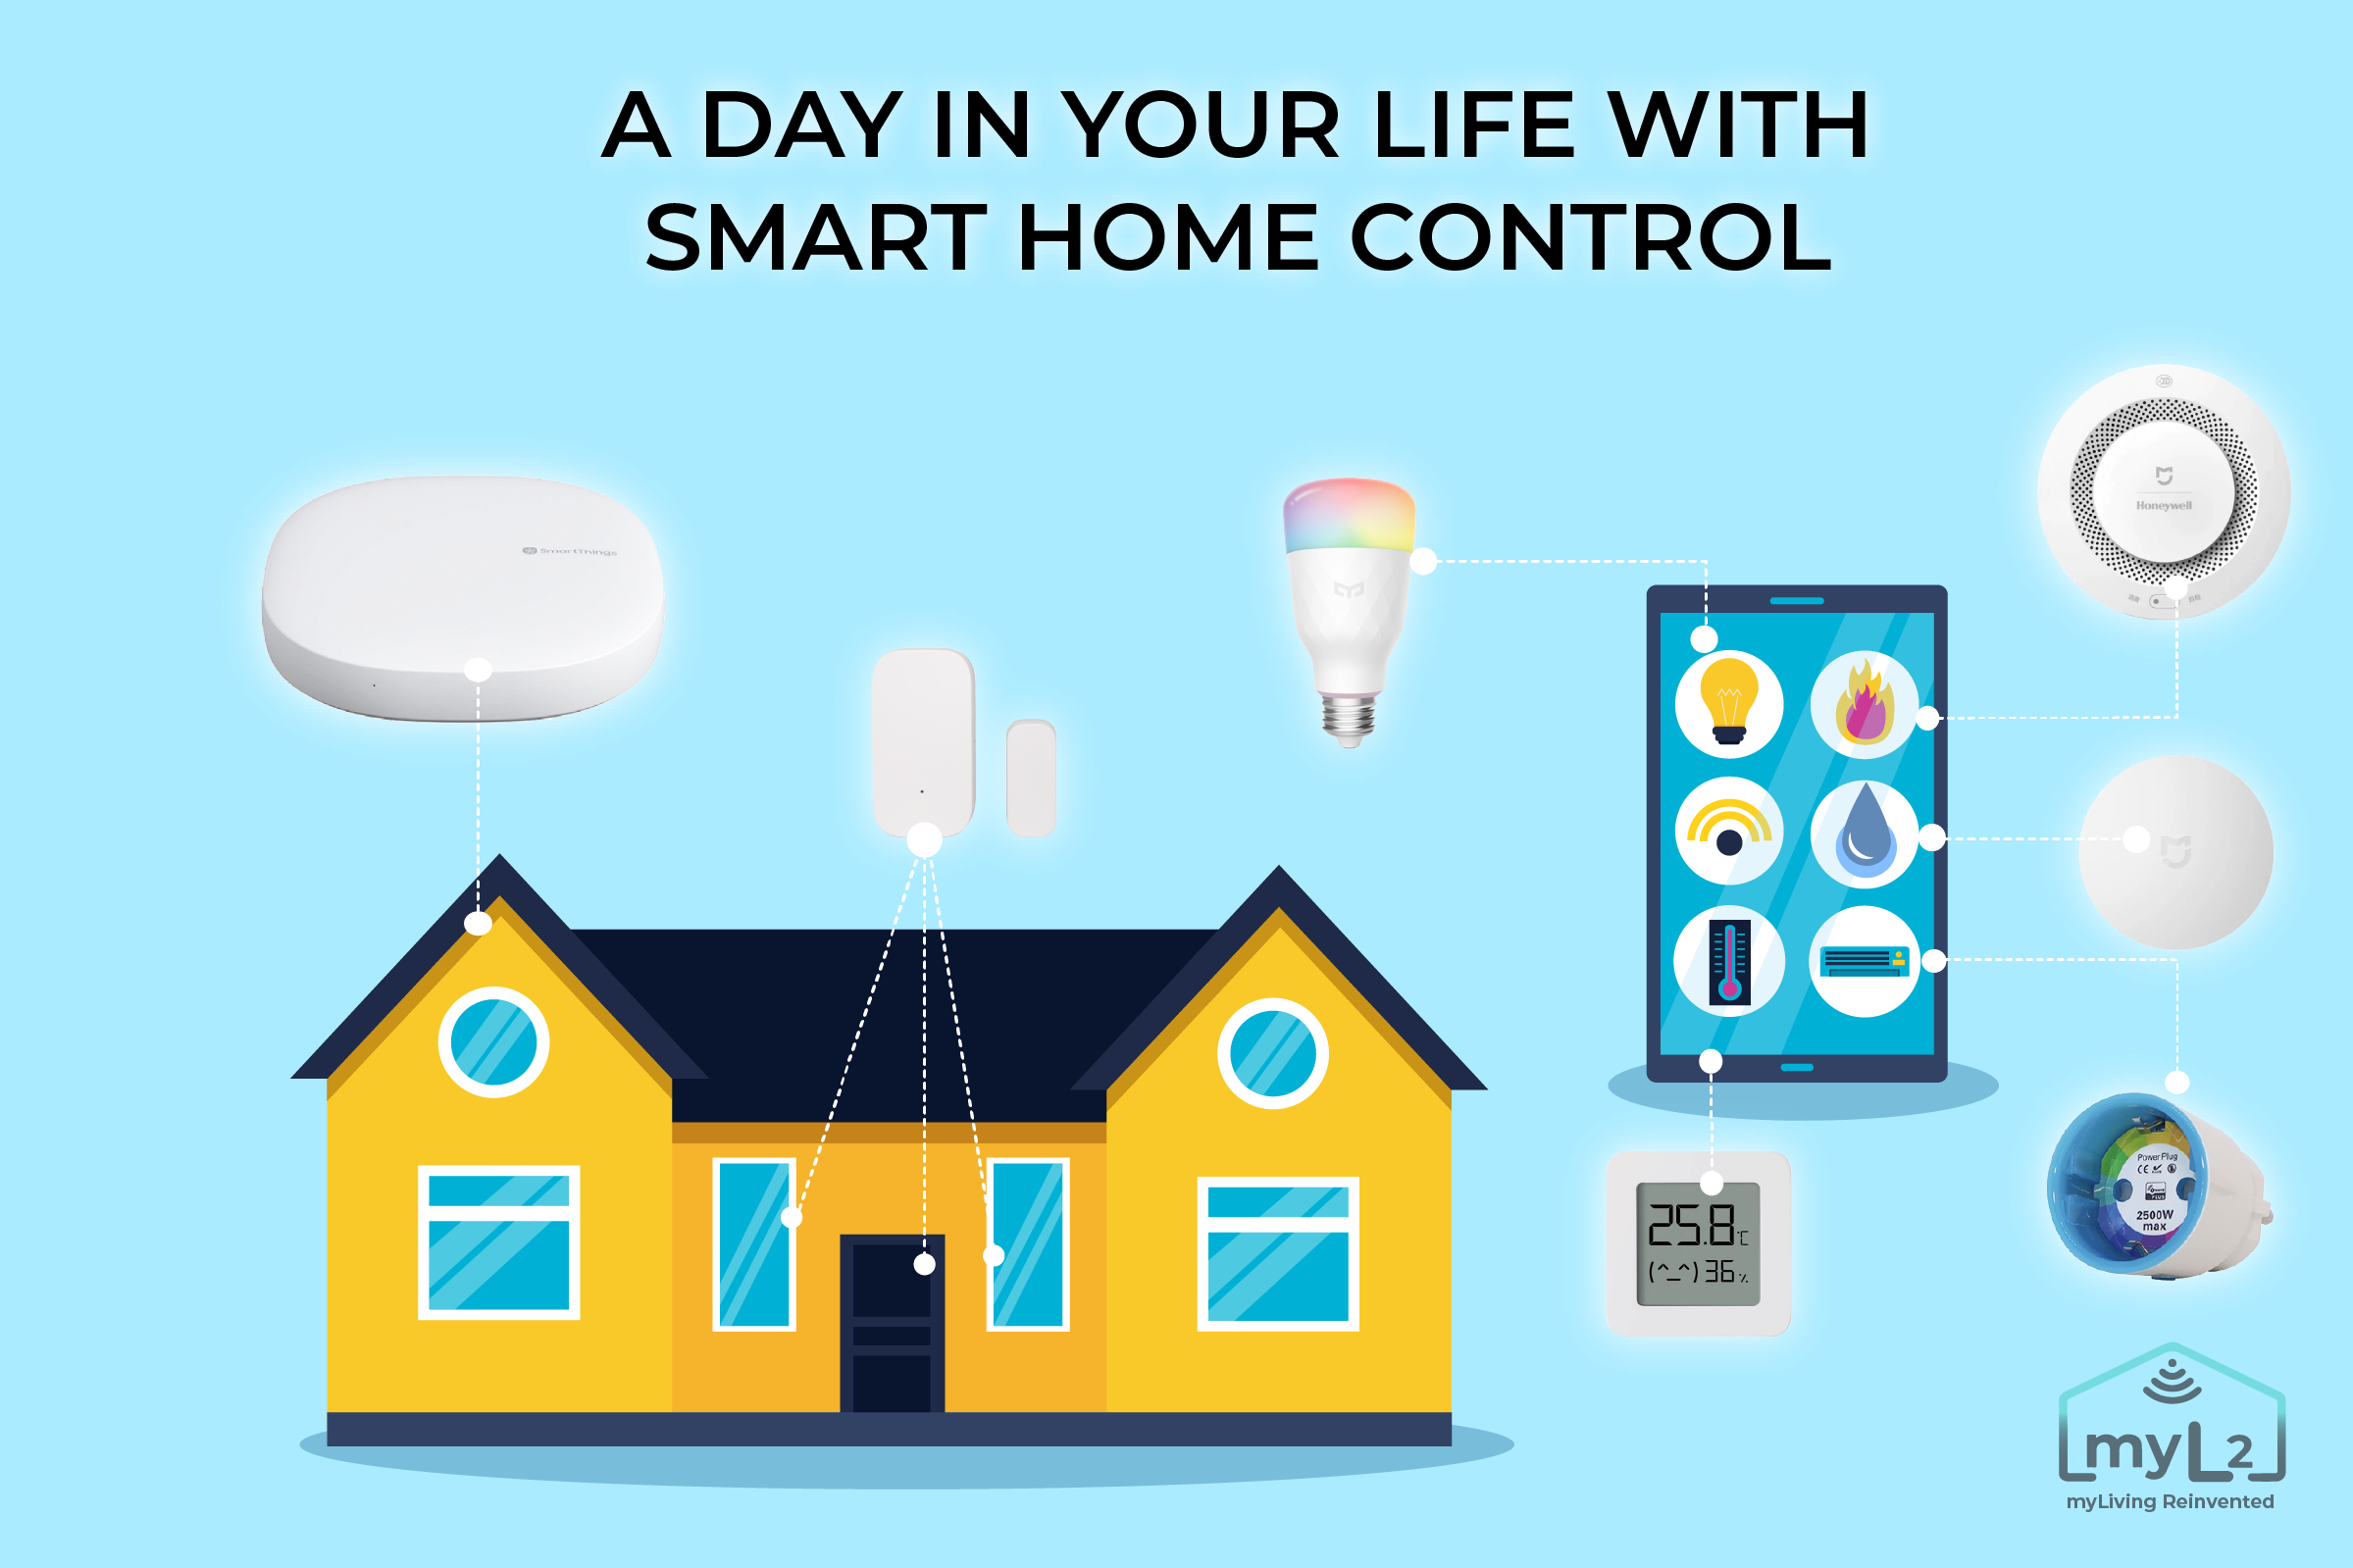 Smart Home Control: A day in your life